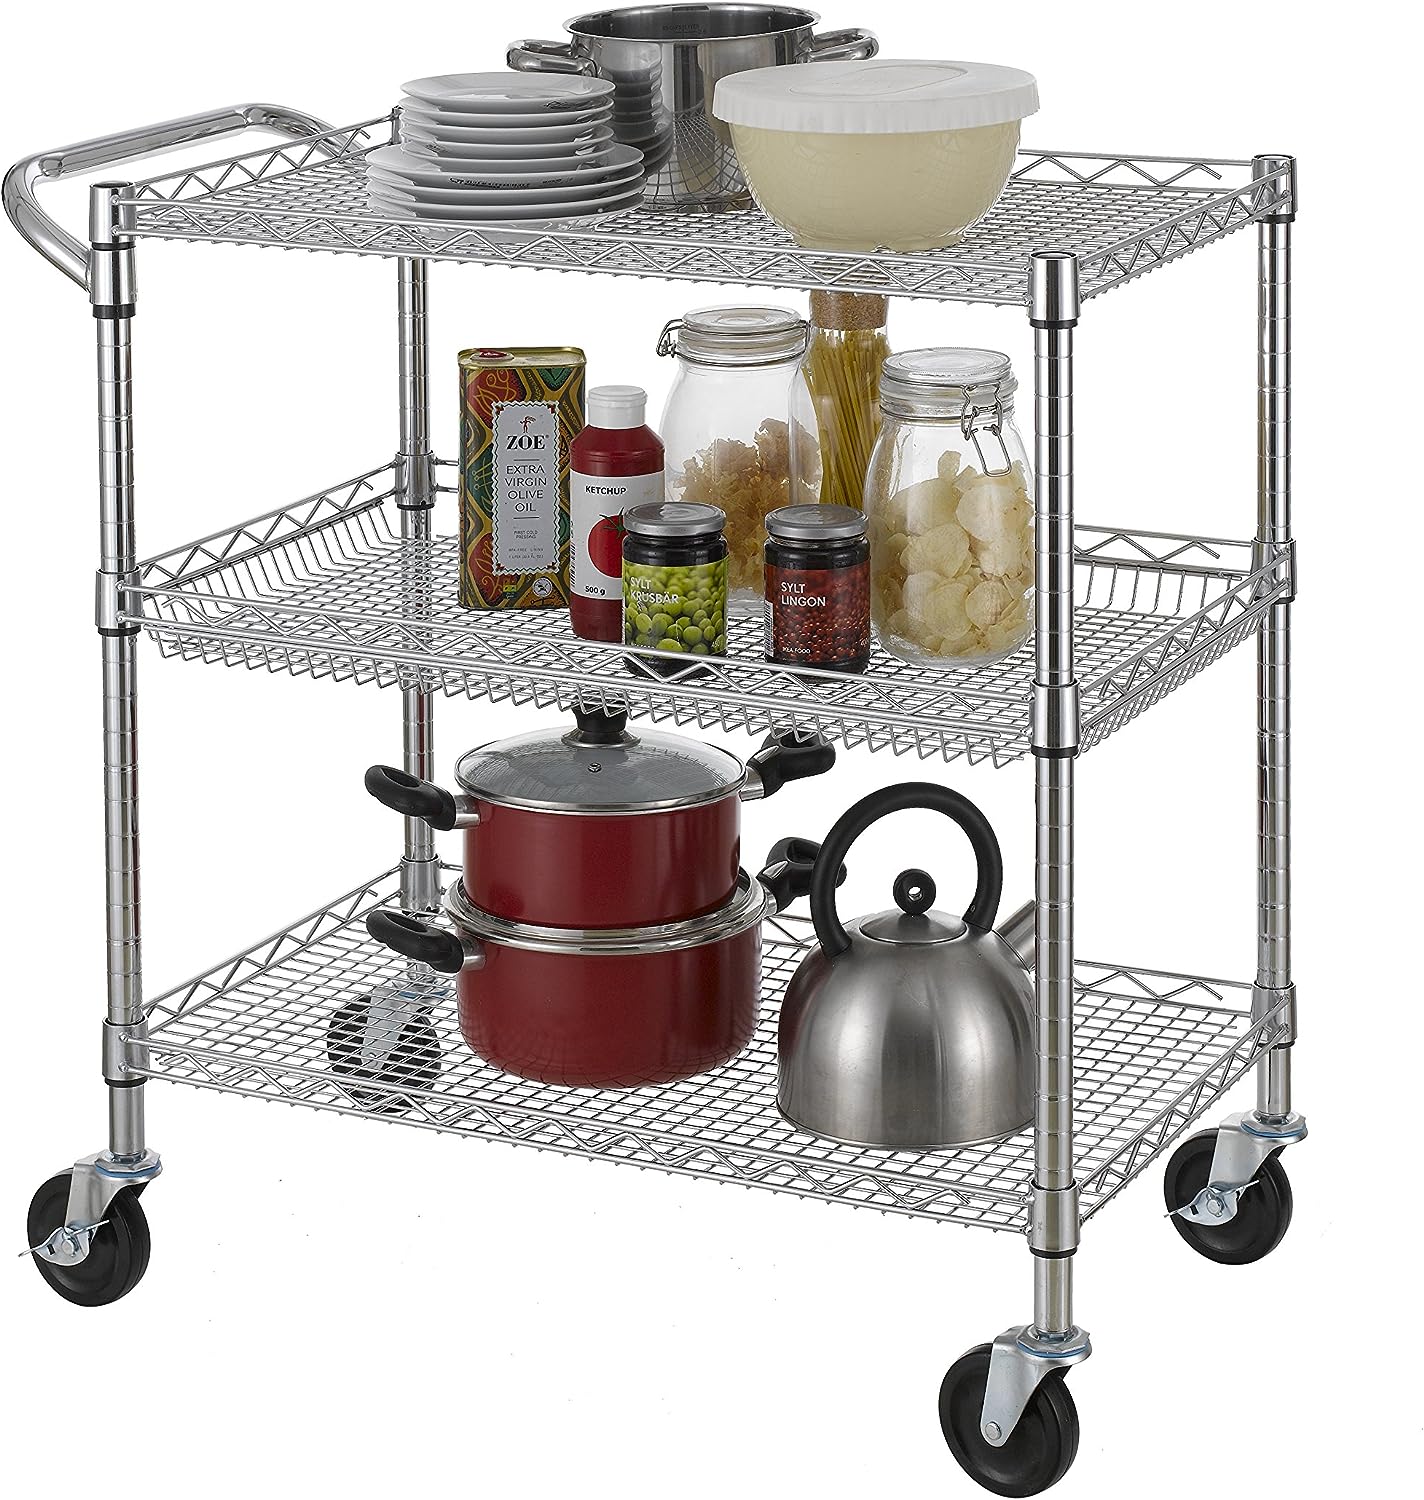 https://bigbigmart.com/wp-content/uploads/2023/09/Finnhomy-3-Tier-Heavy-Duty-Commercial-Grade-Utility-Cart-Wire-Rolling-Cart-with-Handle-Bar-Steel-Service-Cart-with-Wheels-Utility-Shelf-Plant-Display-Shelf-Food-Storage-Trolley-NSF-Listed6.jpg